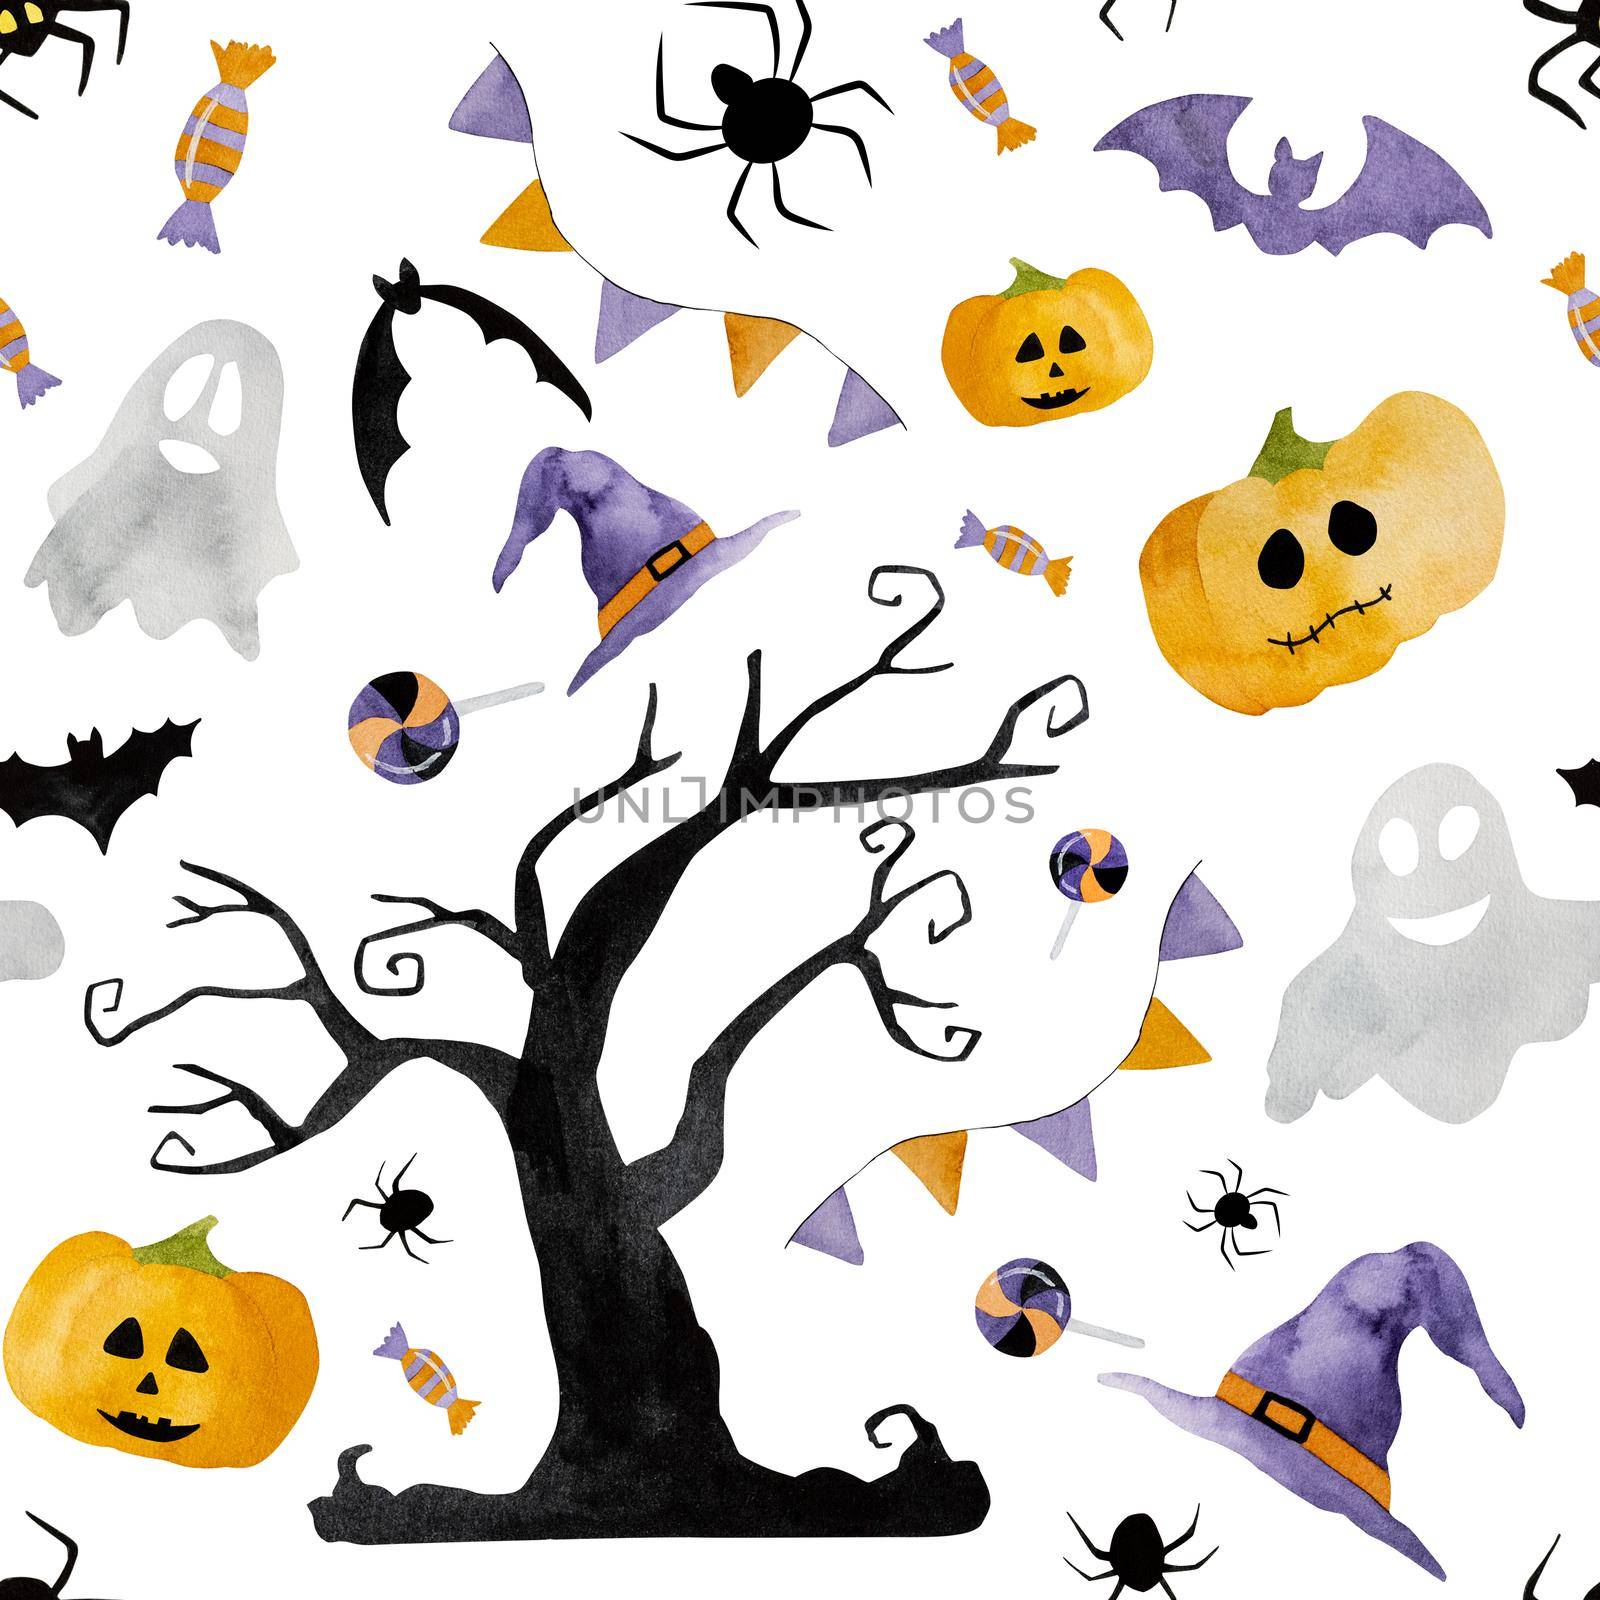 Halloween watercolor illustration wih ghosts, bats and pumpkins. Autumn october scary holiday decoration with spiders, witch hats and dark tree